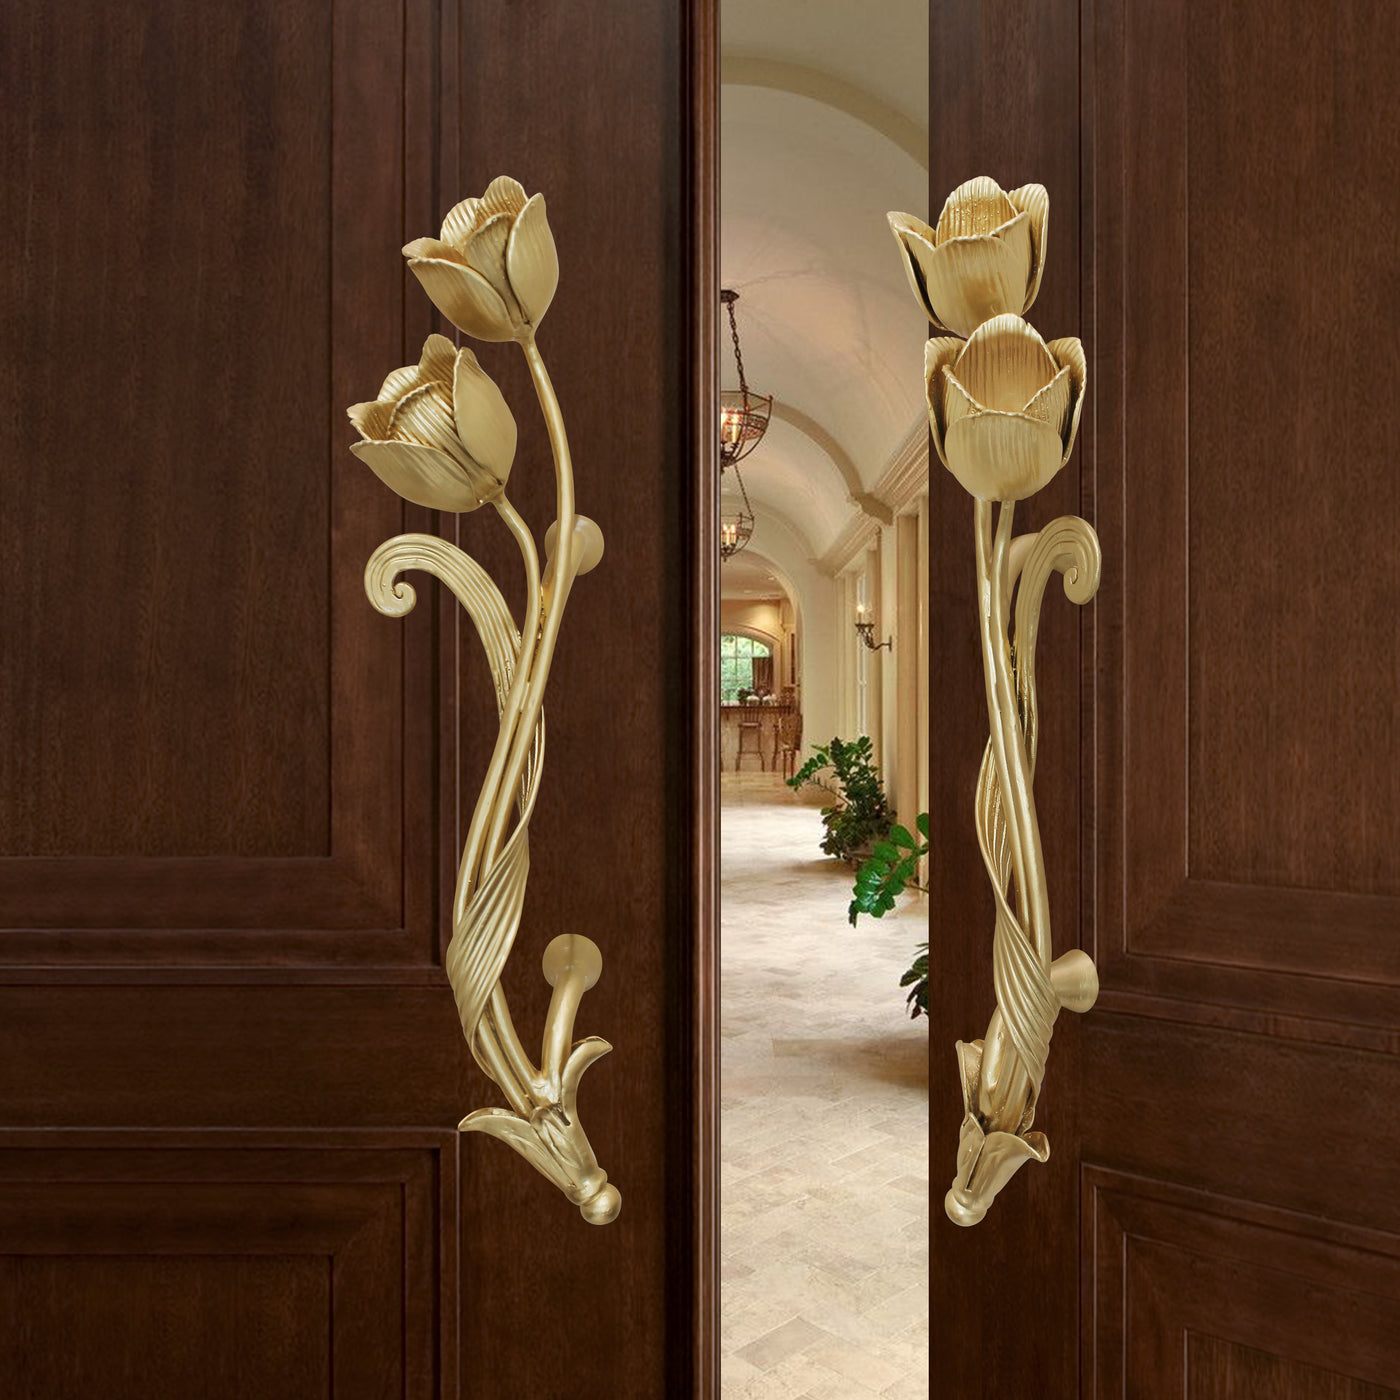 Pair of golden decorative pull handles inspired by tulips mounted on an open wooden door